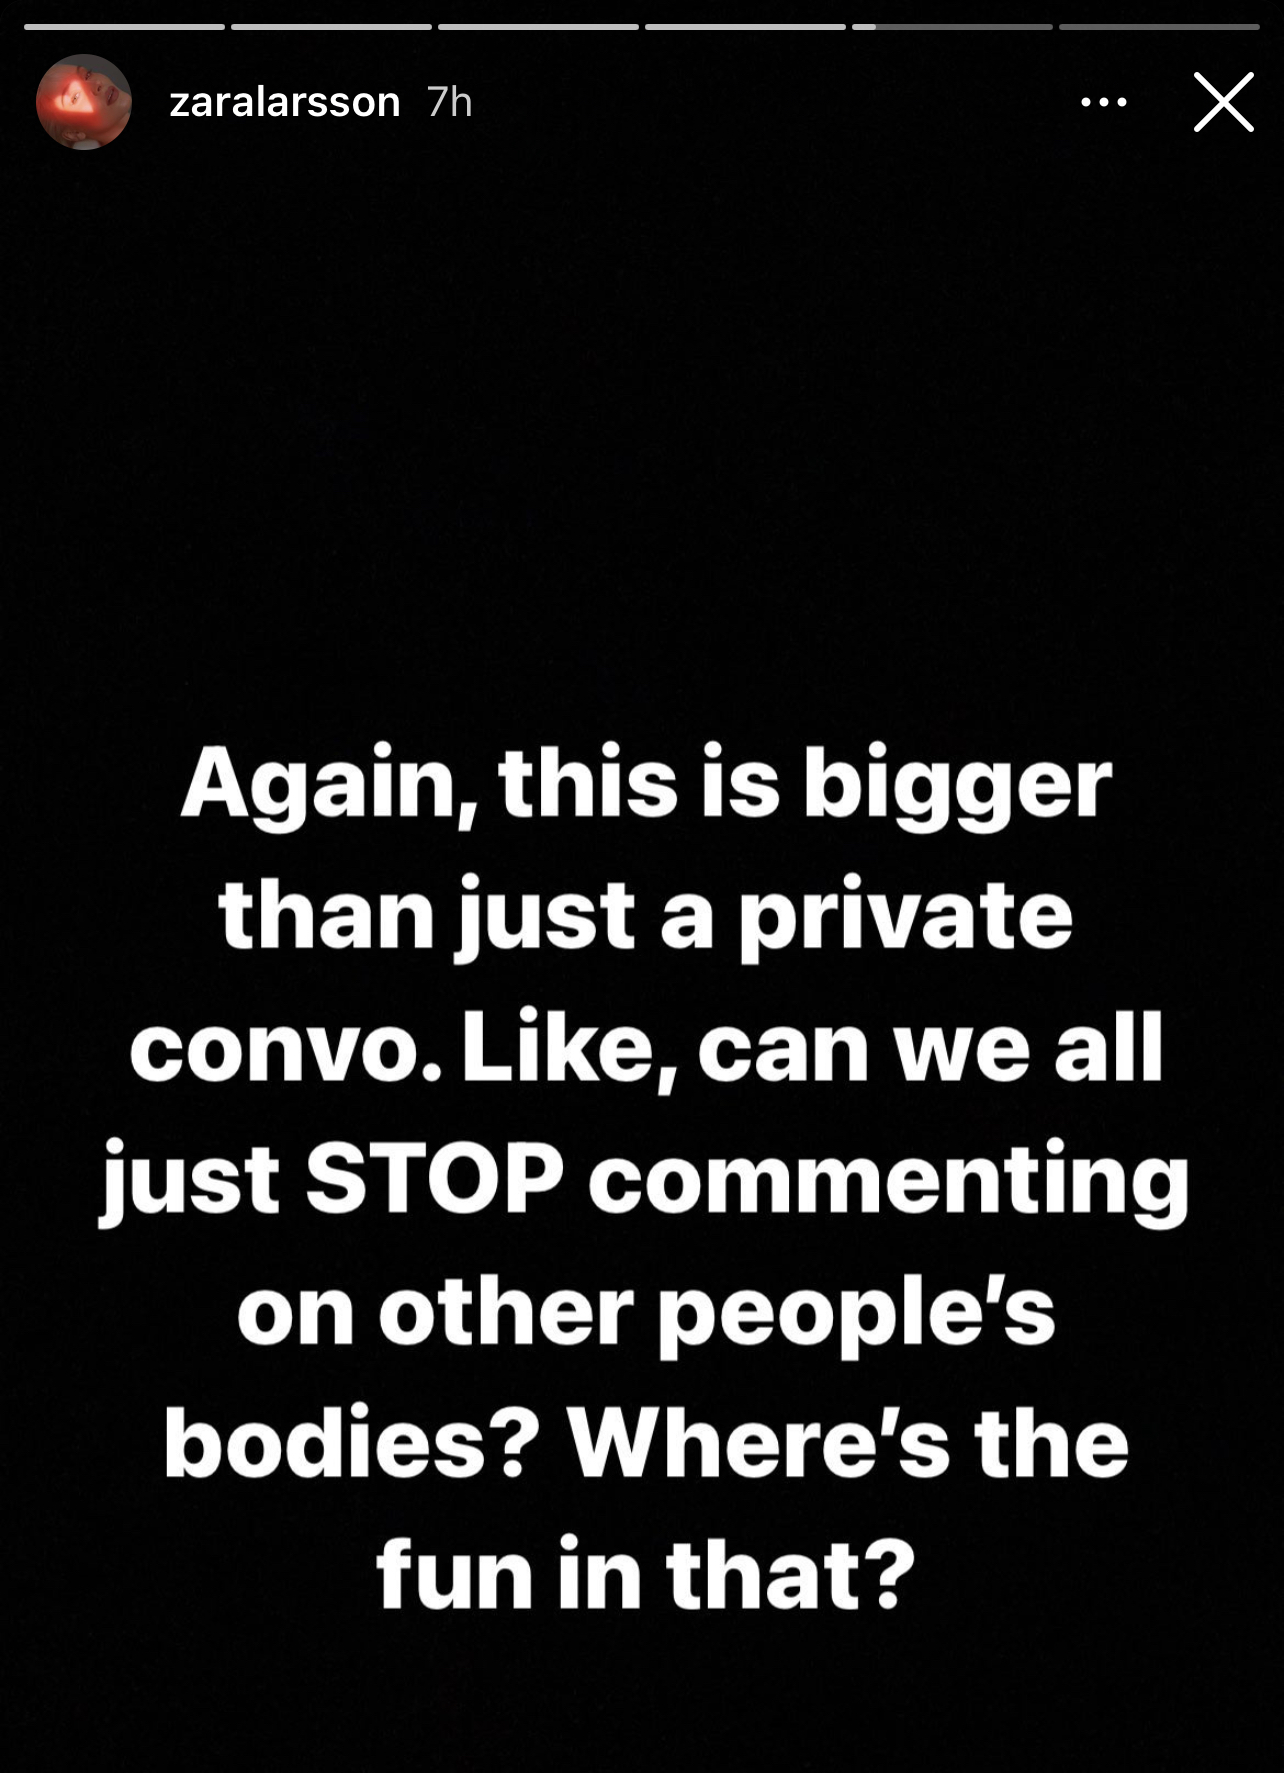 Zara: gain, this is bigger than just a private convo. Like, can we all just STOP commenting on other people's bodies? Where is the fun in that?